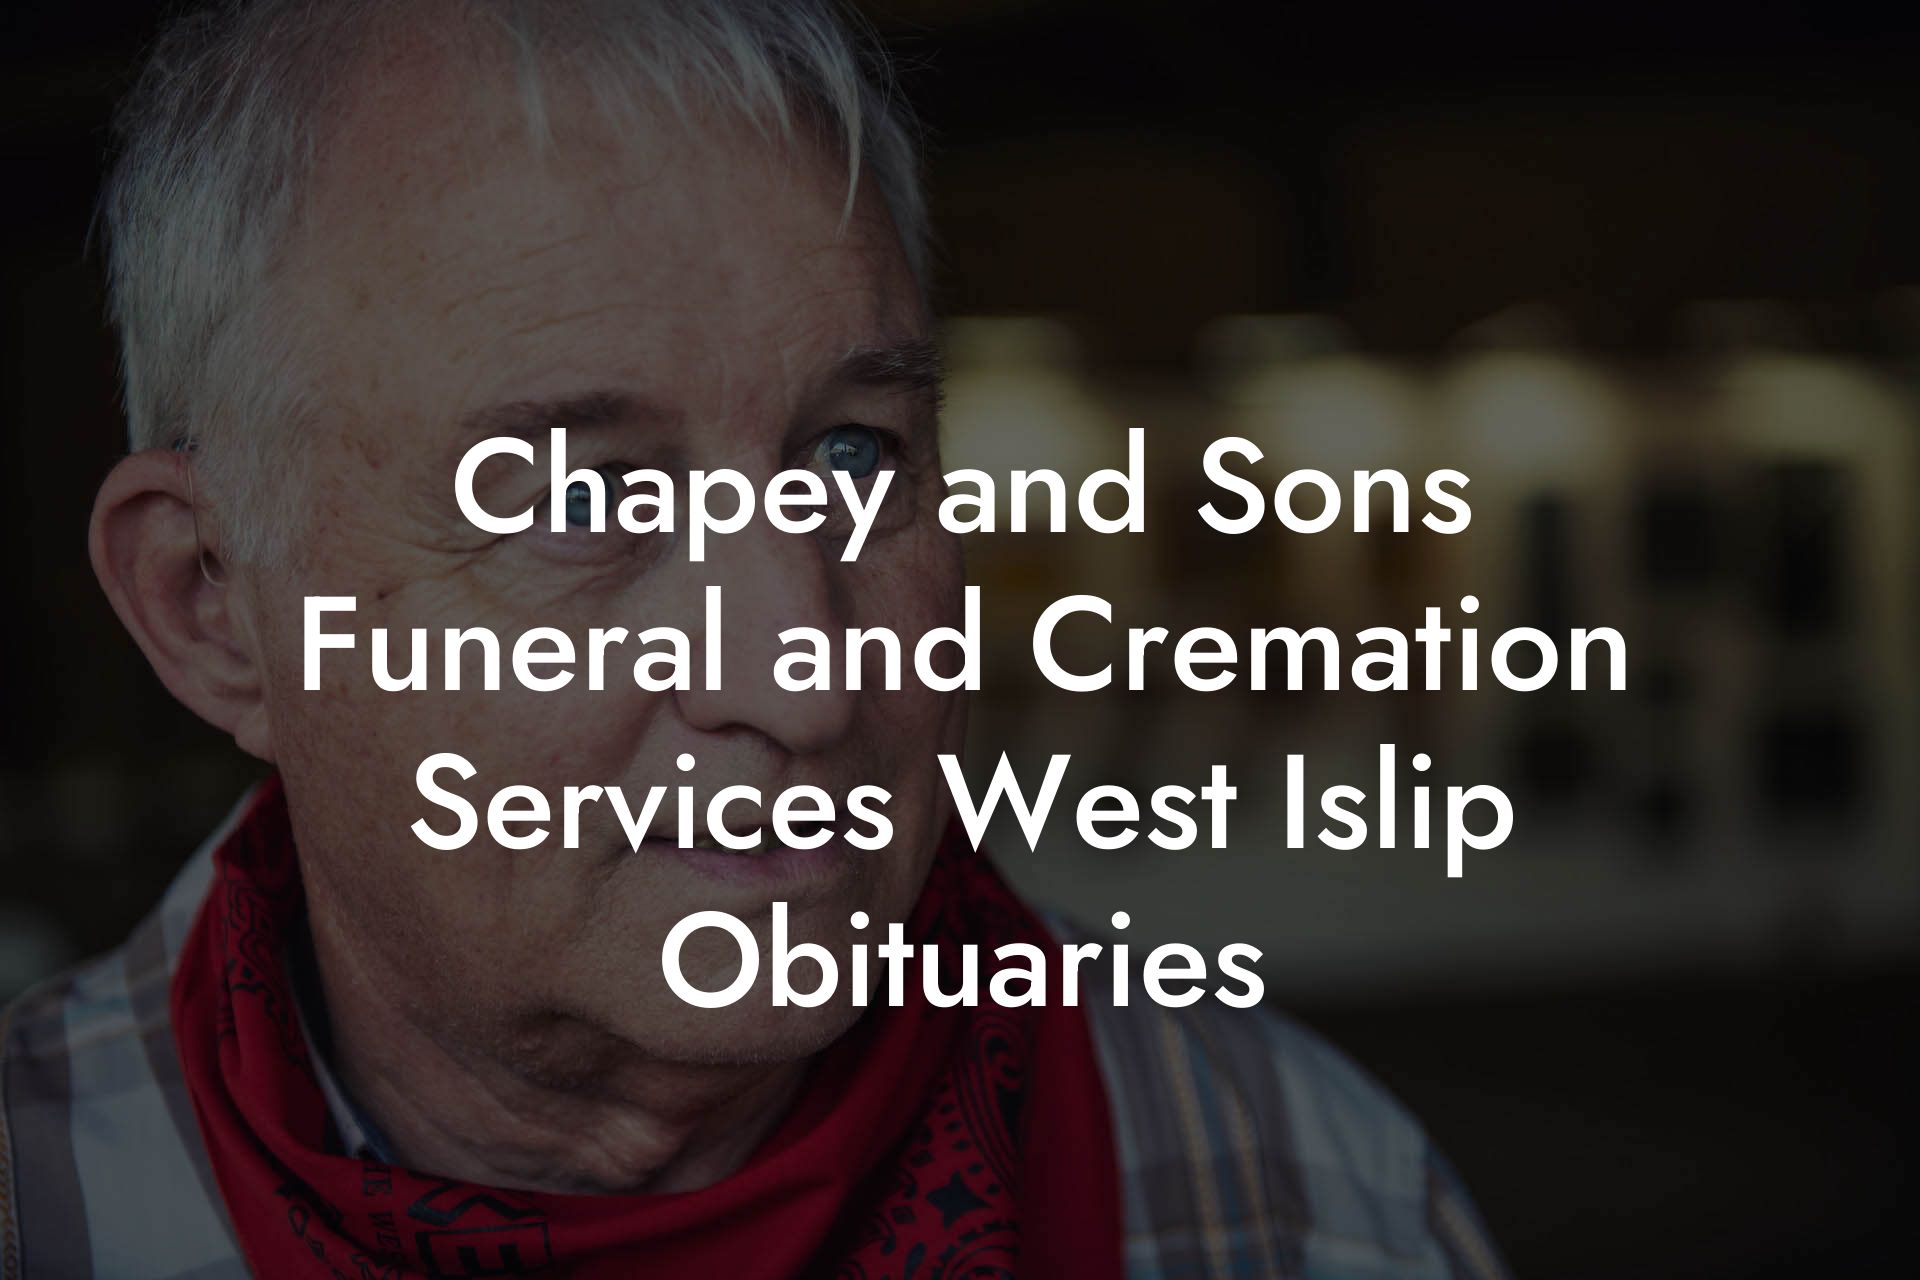 Chapey and Sons Funeral and Cremation Services West Islip Obituaries